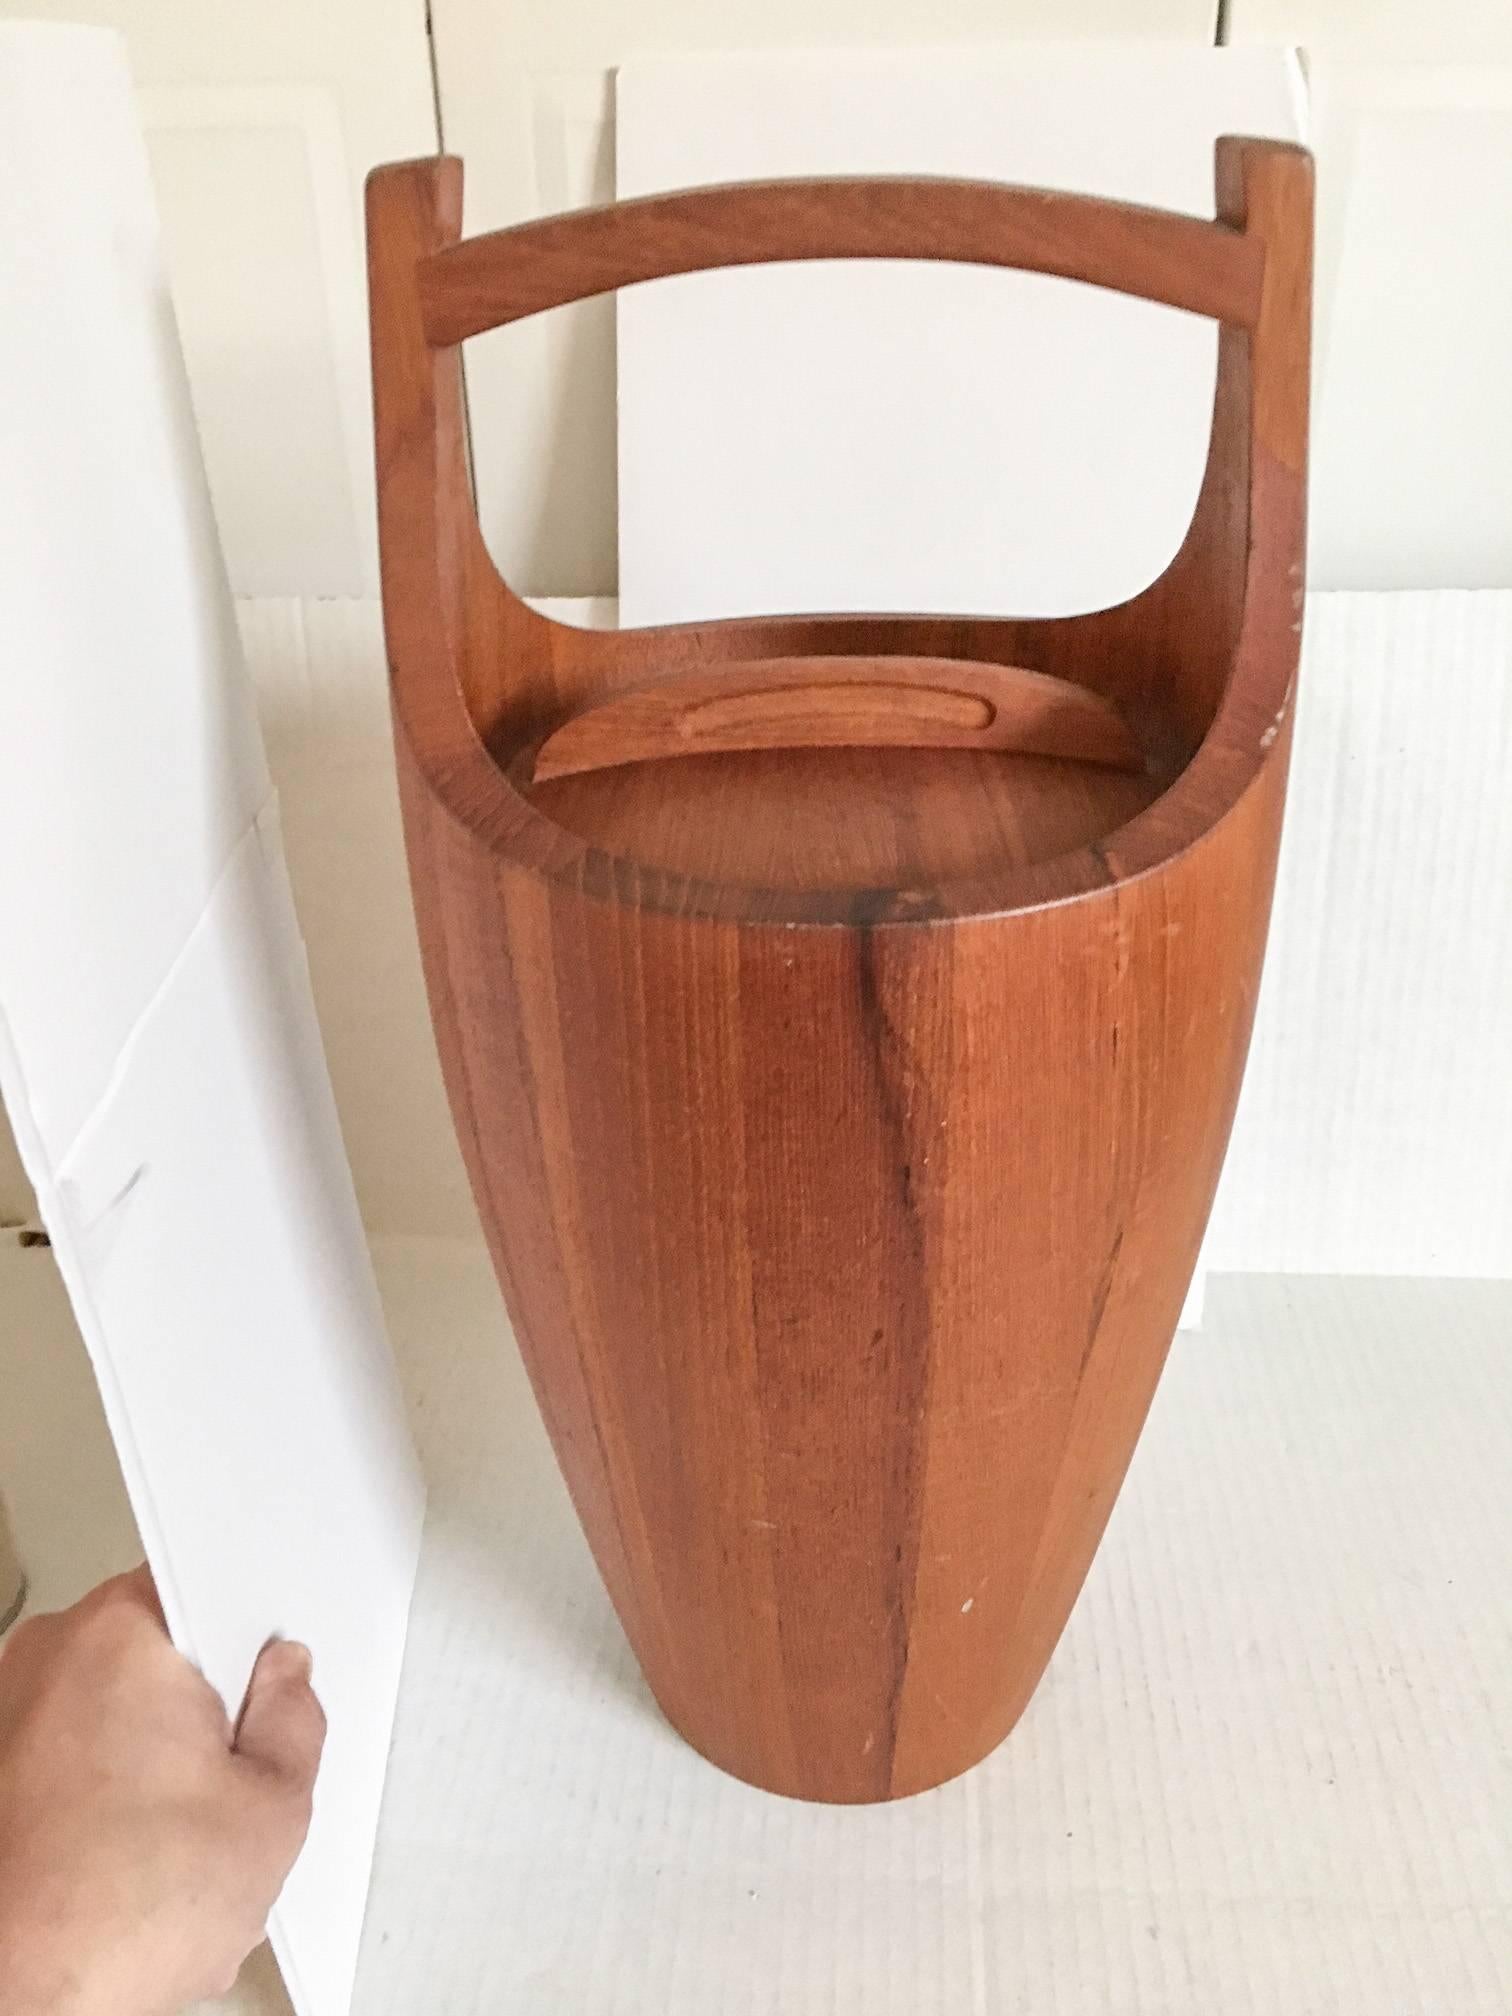 Very large solid teak hardwood Asian-style ice bucket by Dansk. The bucket has a brown plastic interior liner. Marked DANSK on the base. Ice bucket has some scuffs and dings; please review all photographs.